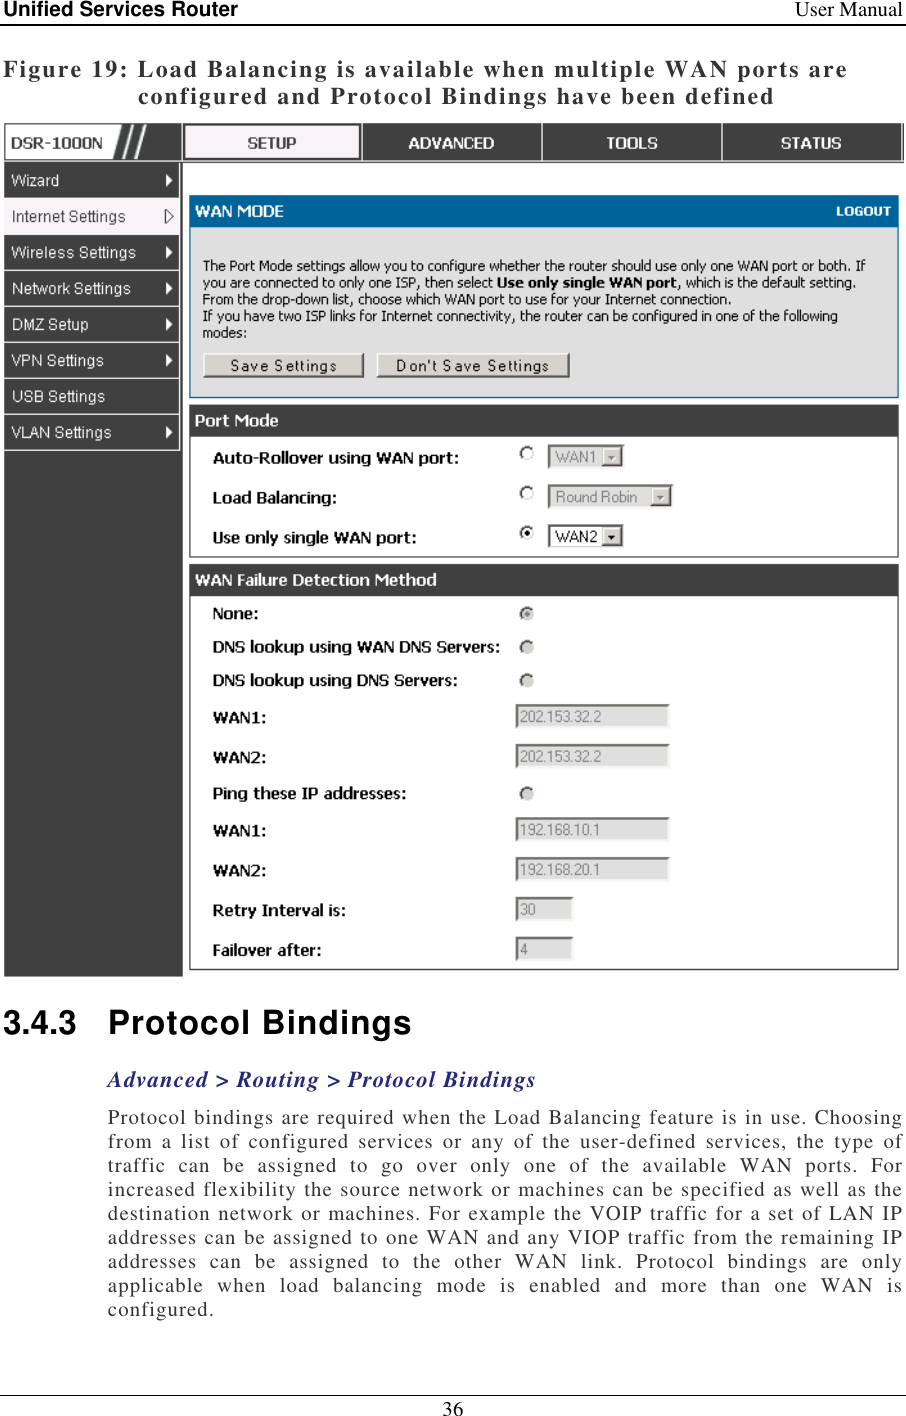 Unified Services Router    User Manual 36  Figure 19: Load Balancing is available when multiple WAN ports are configured and Protocol Bindings have been defined  3.4.3  Protocol Bindings Advanced &gt; Routing &gt; Protocol Bindings Protocol bindings are required when the Load Balancing feature is in use. Choosing from  a  list  of  configured  services  or  any  of  the  user-defined  services,  the  type  of traffic  can  be  assigned  to  go  over  only  one  of  the  available  WAN  ports.  For increased flexibility the source network or machines can be specified as well as the destination network or machines. For example the VOIP traffic for a set of LAN IP addresses can be assigned to one WAN and any VIOP traffic from the remaining IP addresses  can  be  assigned  to  the  other  WAN  link.  Protocol  bindings  are  only applicable  when  load  balancing  mode  is  enabled  and  more  than  one  WAN  is configured.  